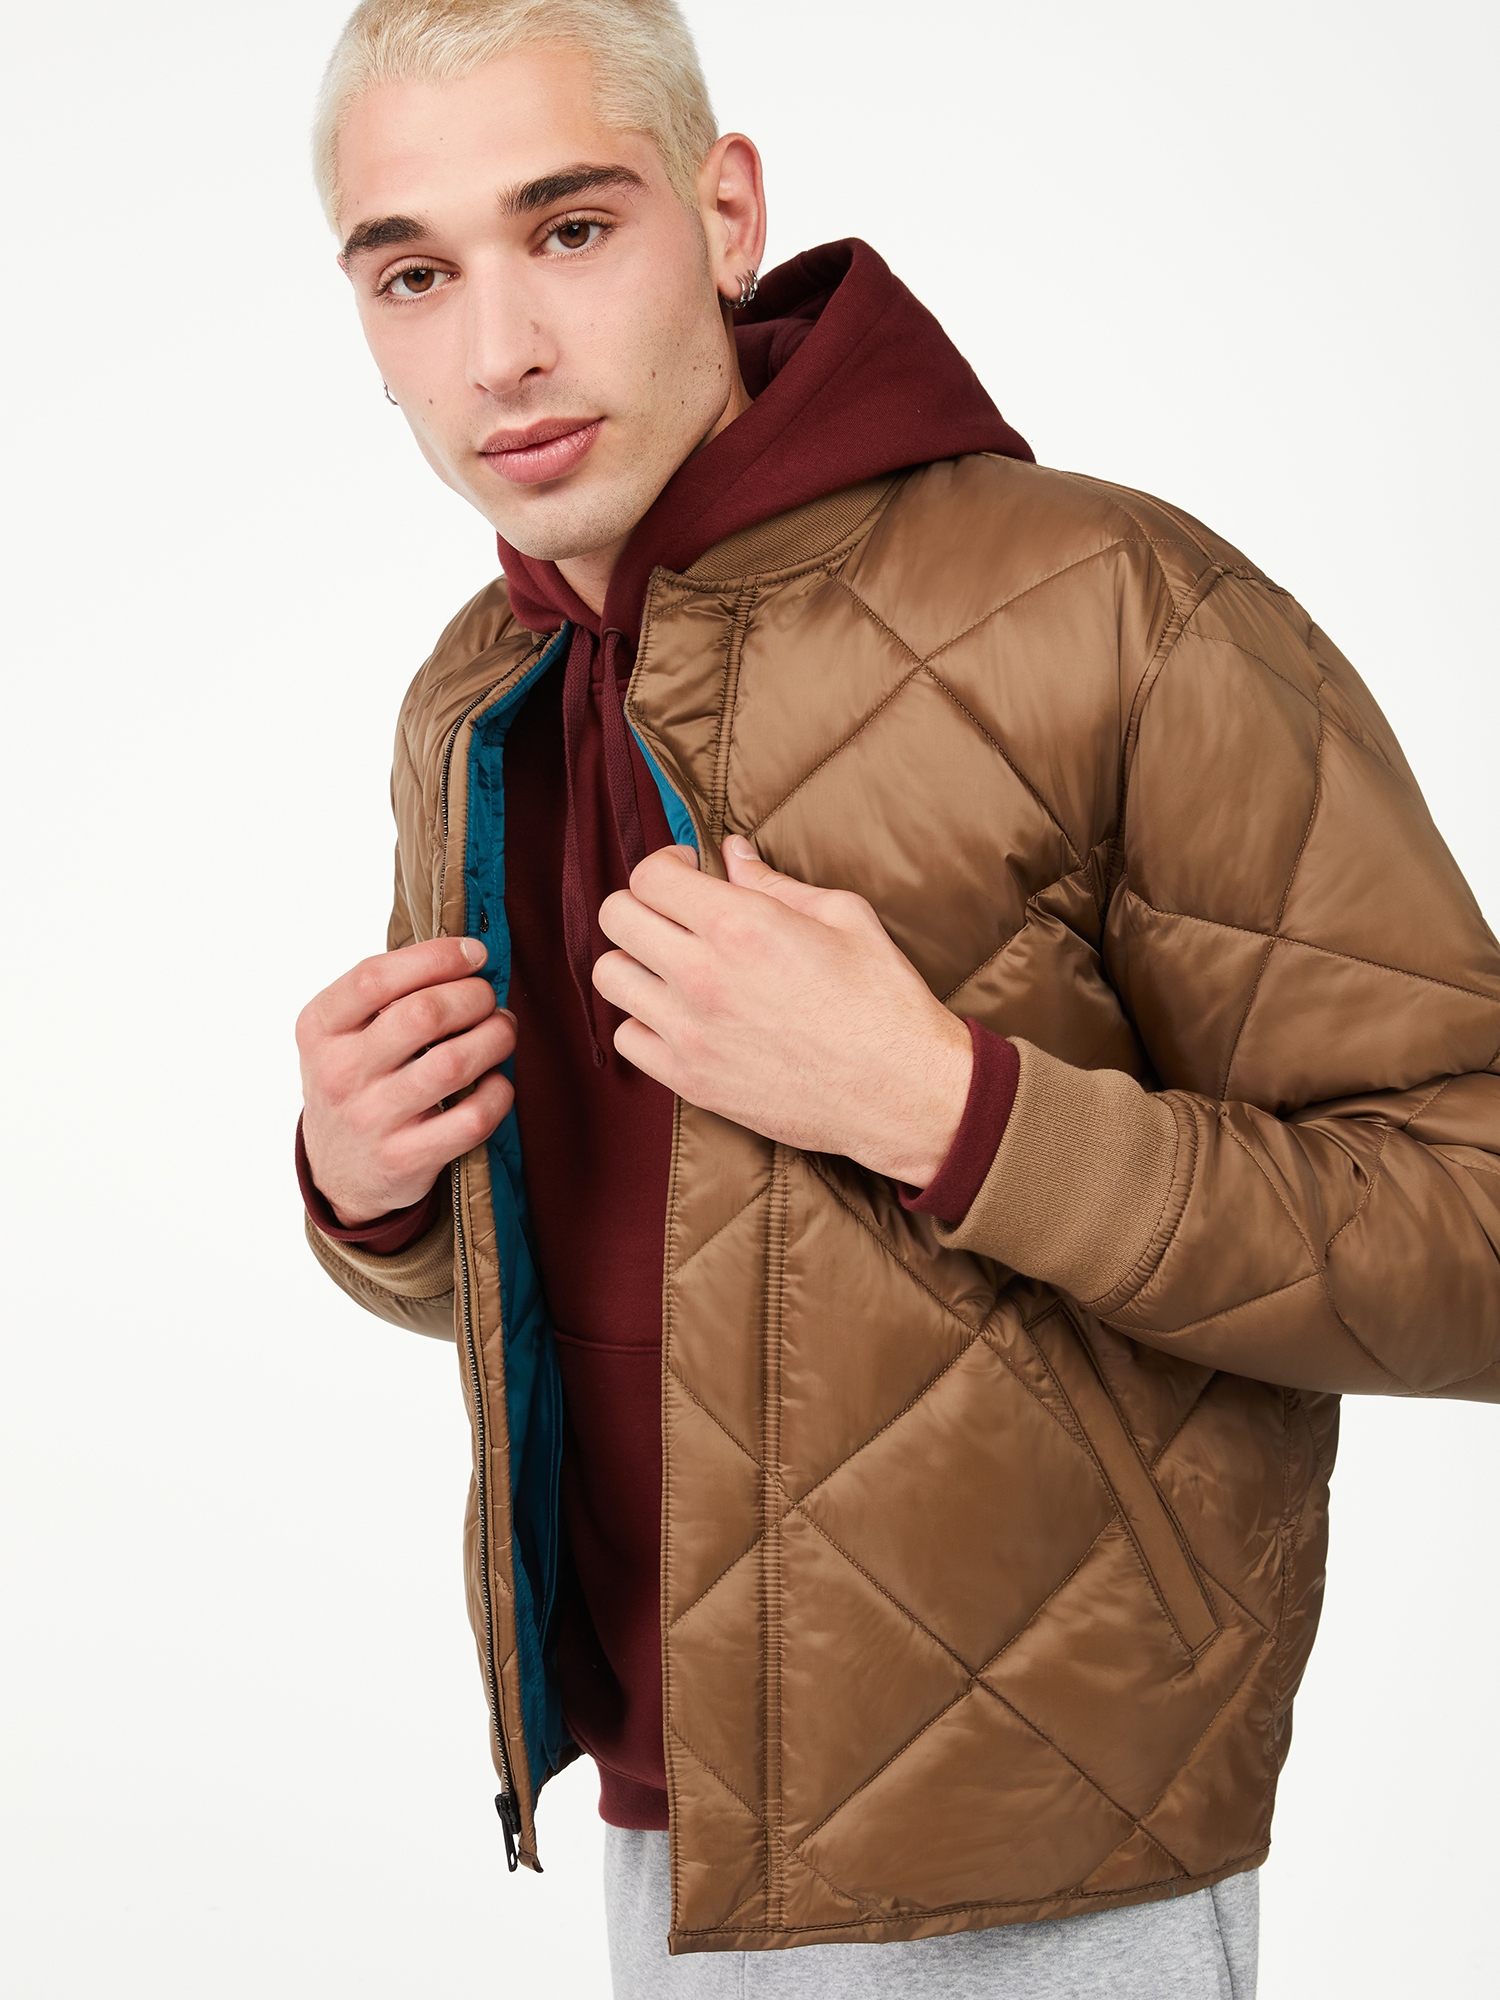 Free Assembly Men's Quilted Bomber Jacket - image 1 of 6